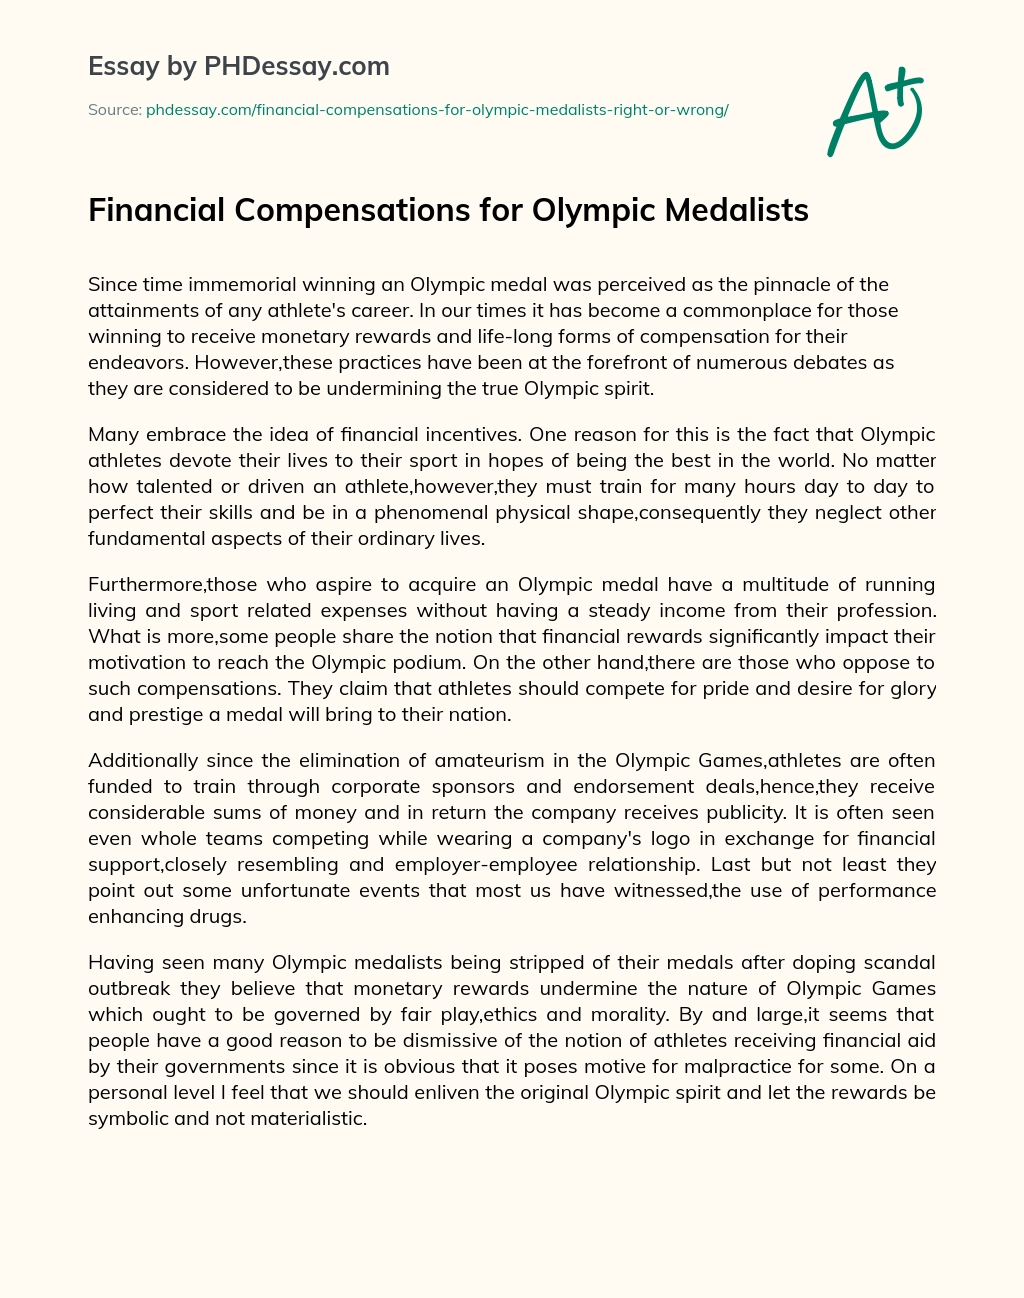 Financial Compensations for Olympic Medalists essay